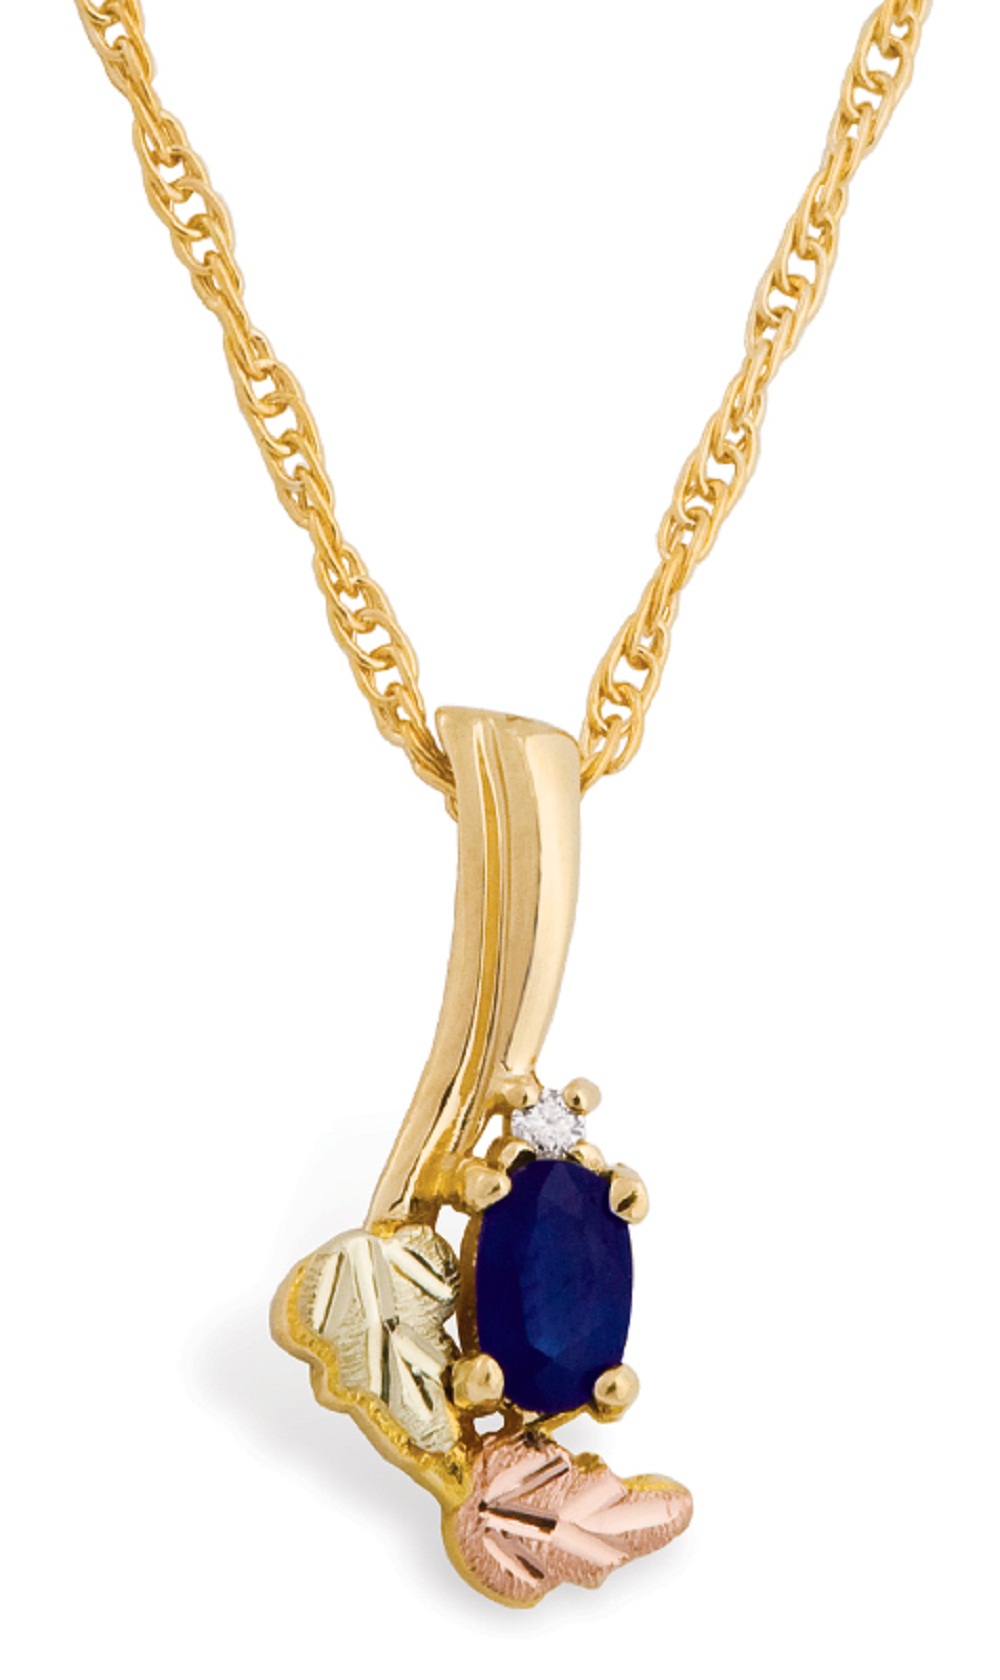 Black Hills Gold Necklace with Blue Sapphire and Diamond Pendant. 